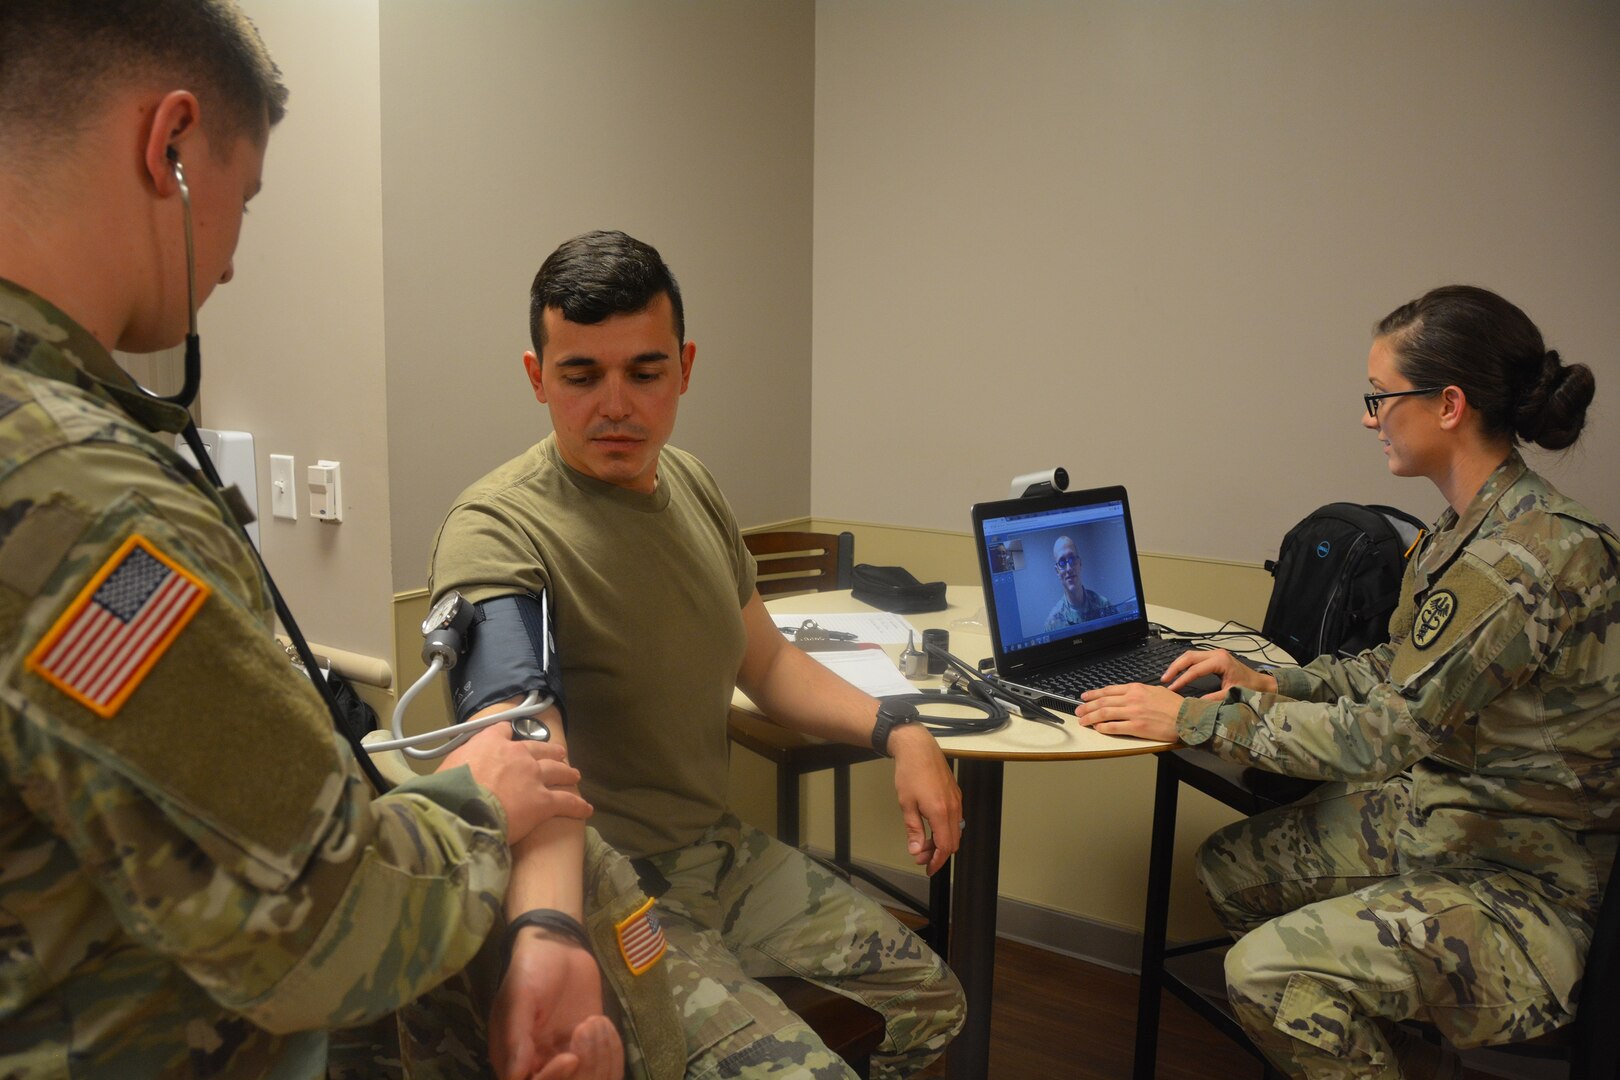 Mobile Medic Spc. Amanda Knight sets up a video chat with a medical provider while Mobile Medic Spc. Joshua Rath checks Spc. Joao Dos Santos Faustino's vitals during an early morning sick call at the 232nd Medical Battalion Sept. 25 2017.